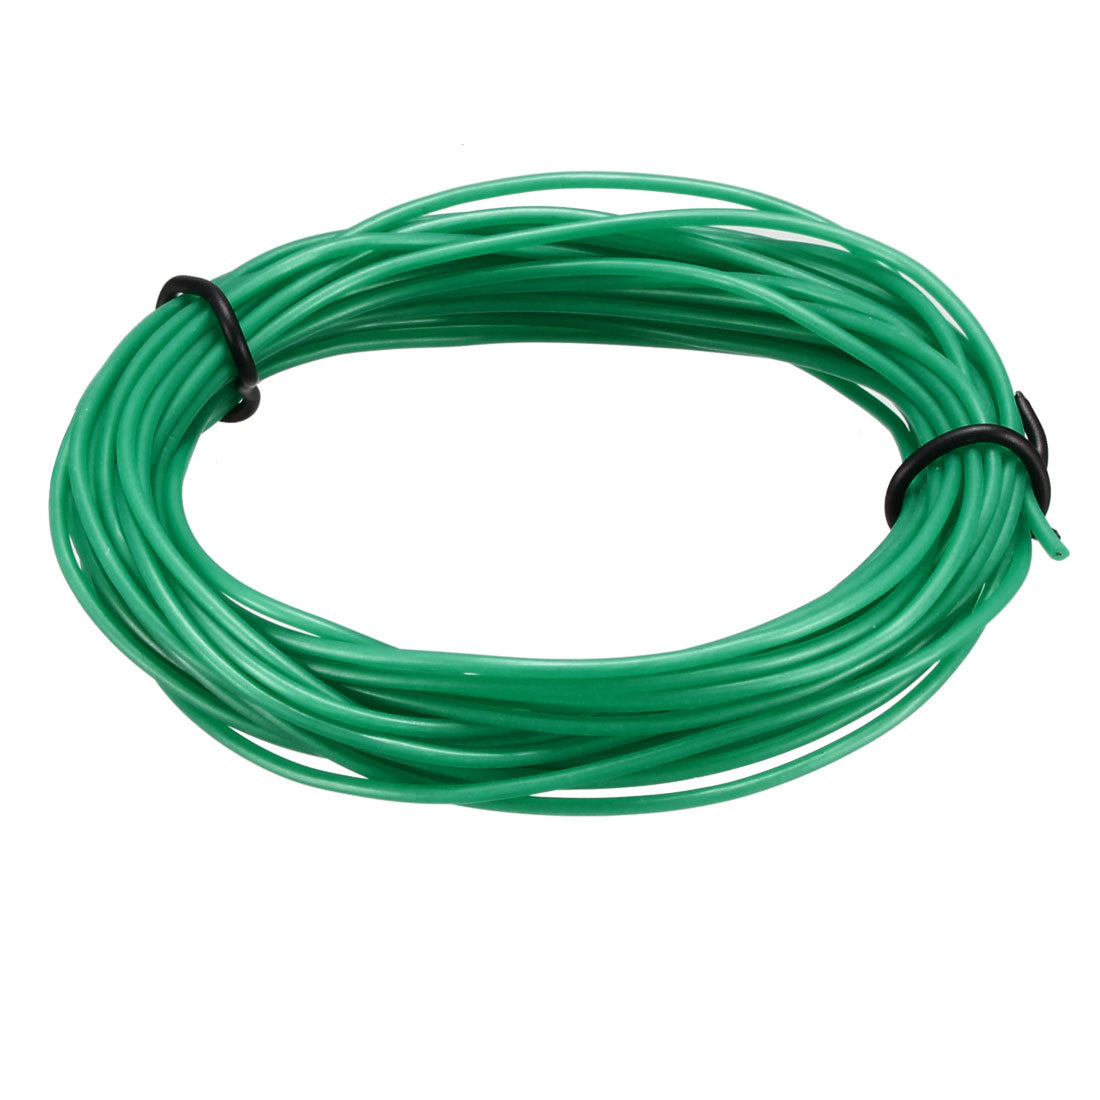 uxcell Uxcell Extension Cable Wire Cord 28 AWG Gauge Flexible Stranded Copper Cable Silicone Wire 5M Length Green for RC